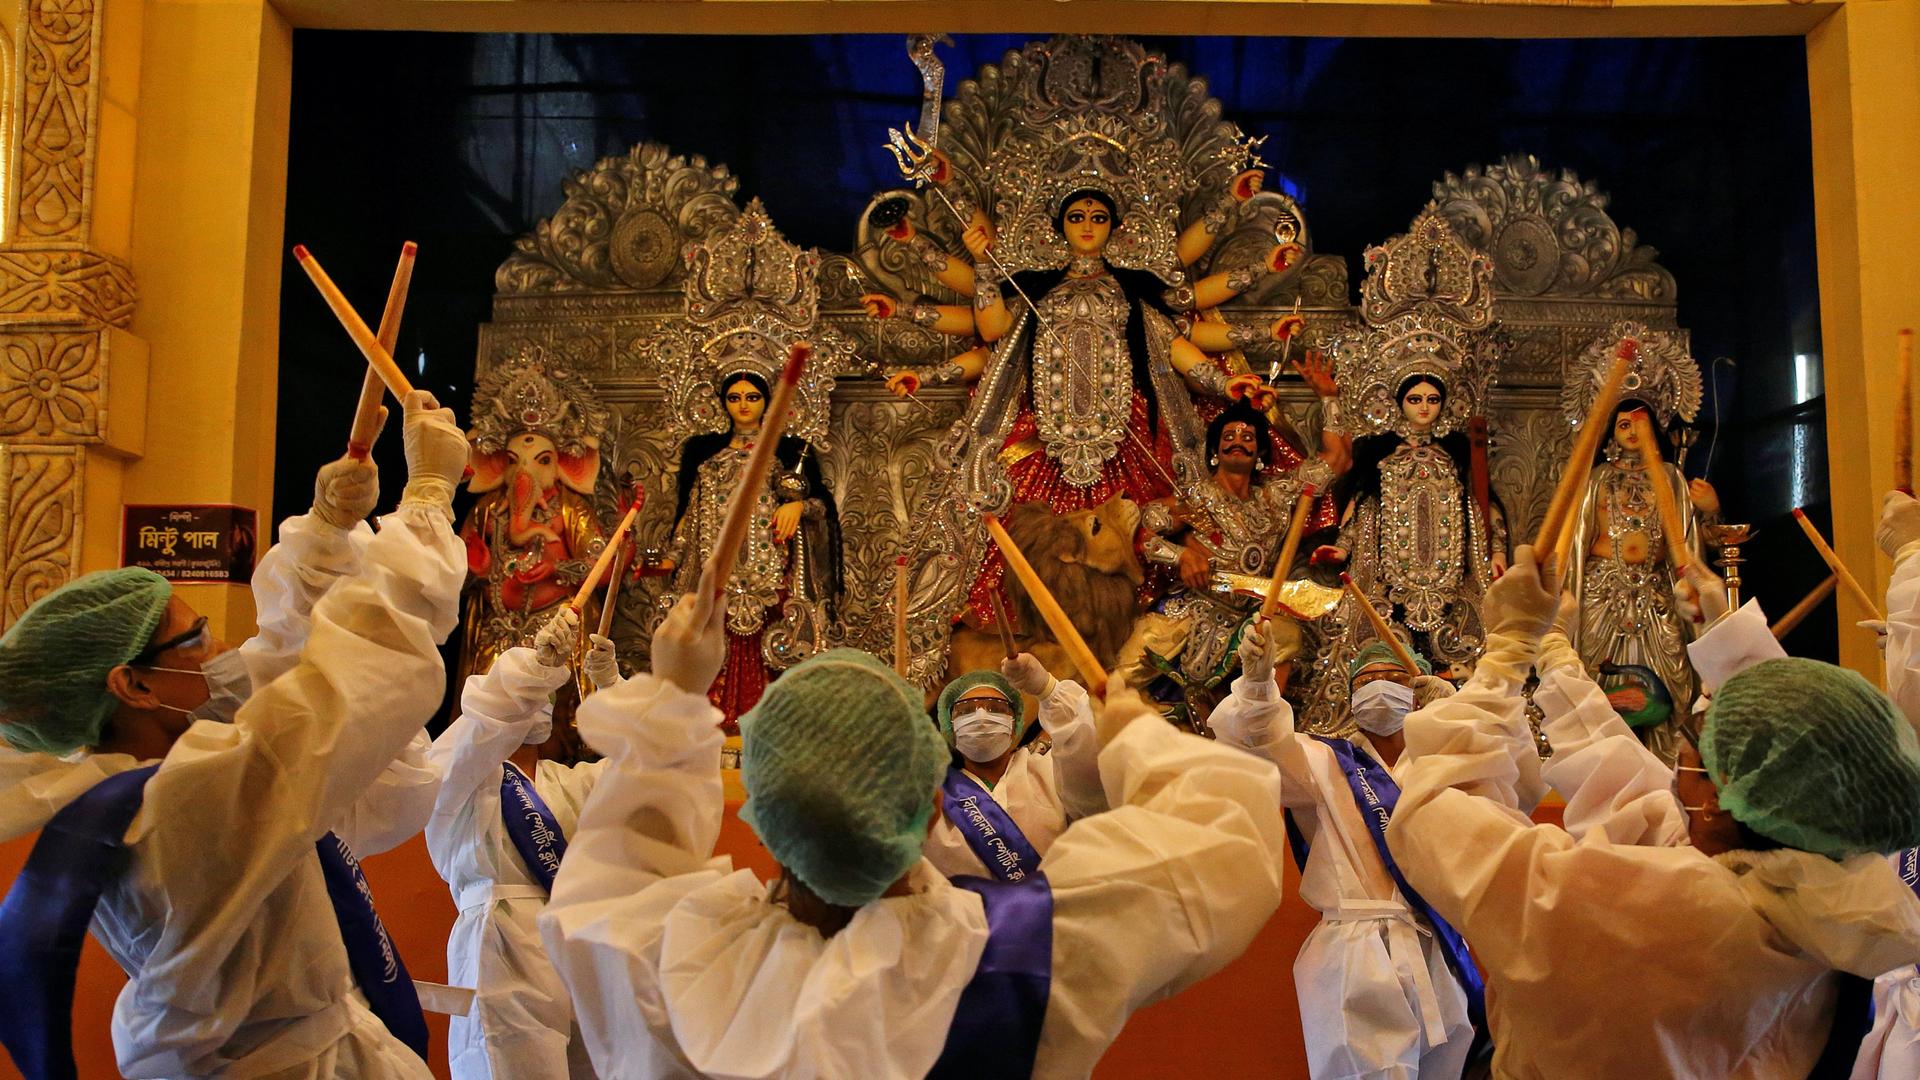 People wearing protective gear worship in front of a 10-armed ornate goddess idol on a platform. 